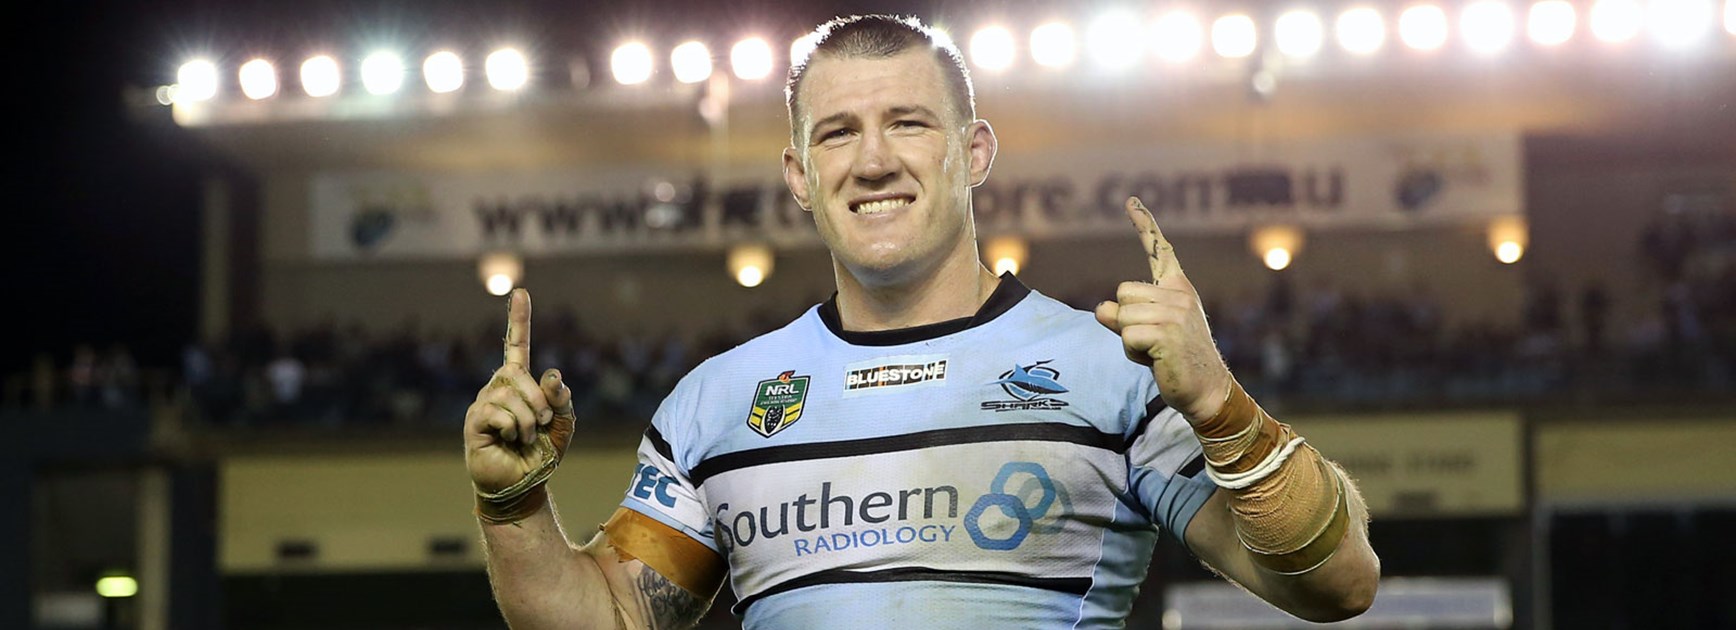 Sharks captain Paul Gallen ran for over 250 metres against the Roosters in his return from injury.